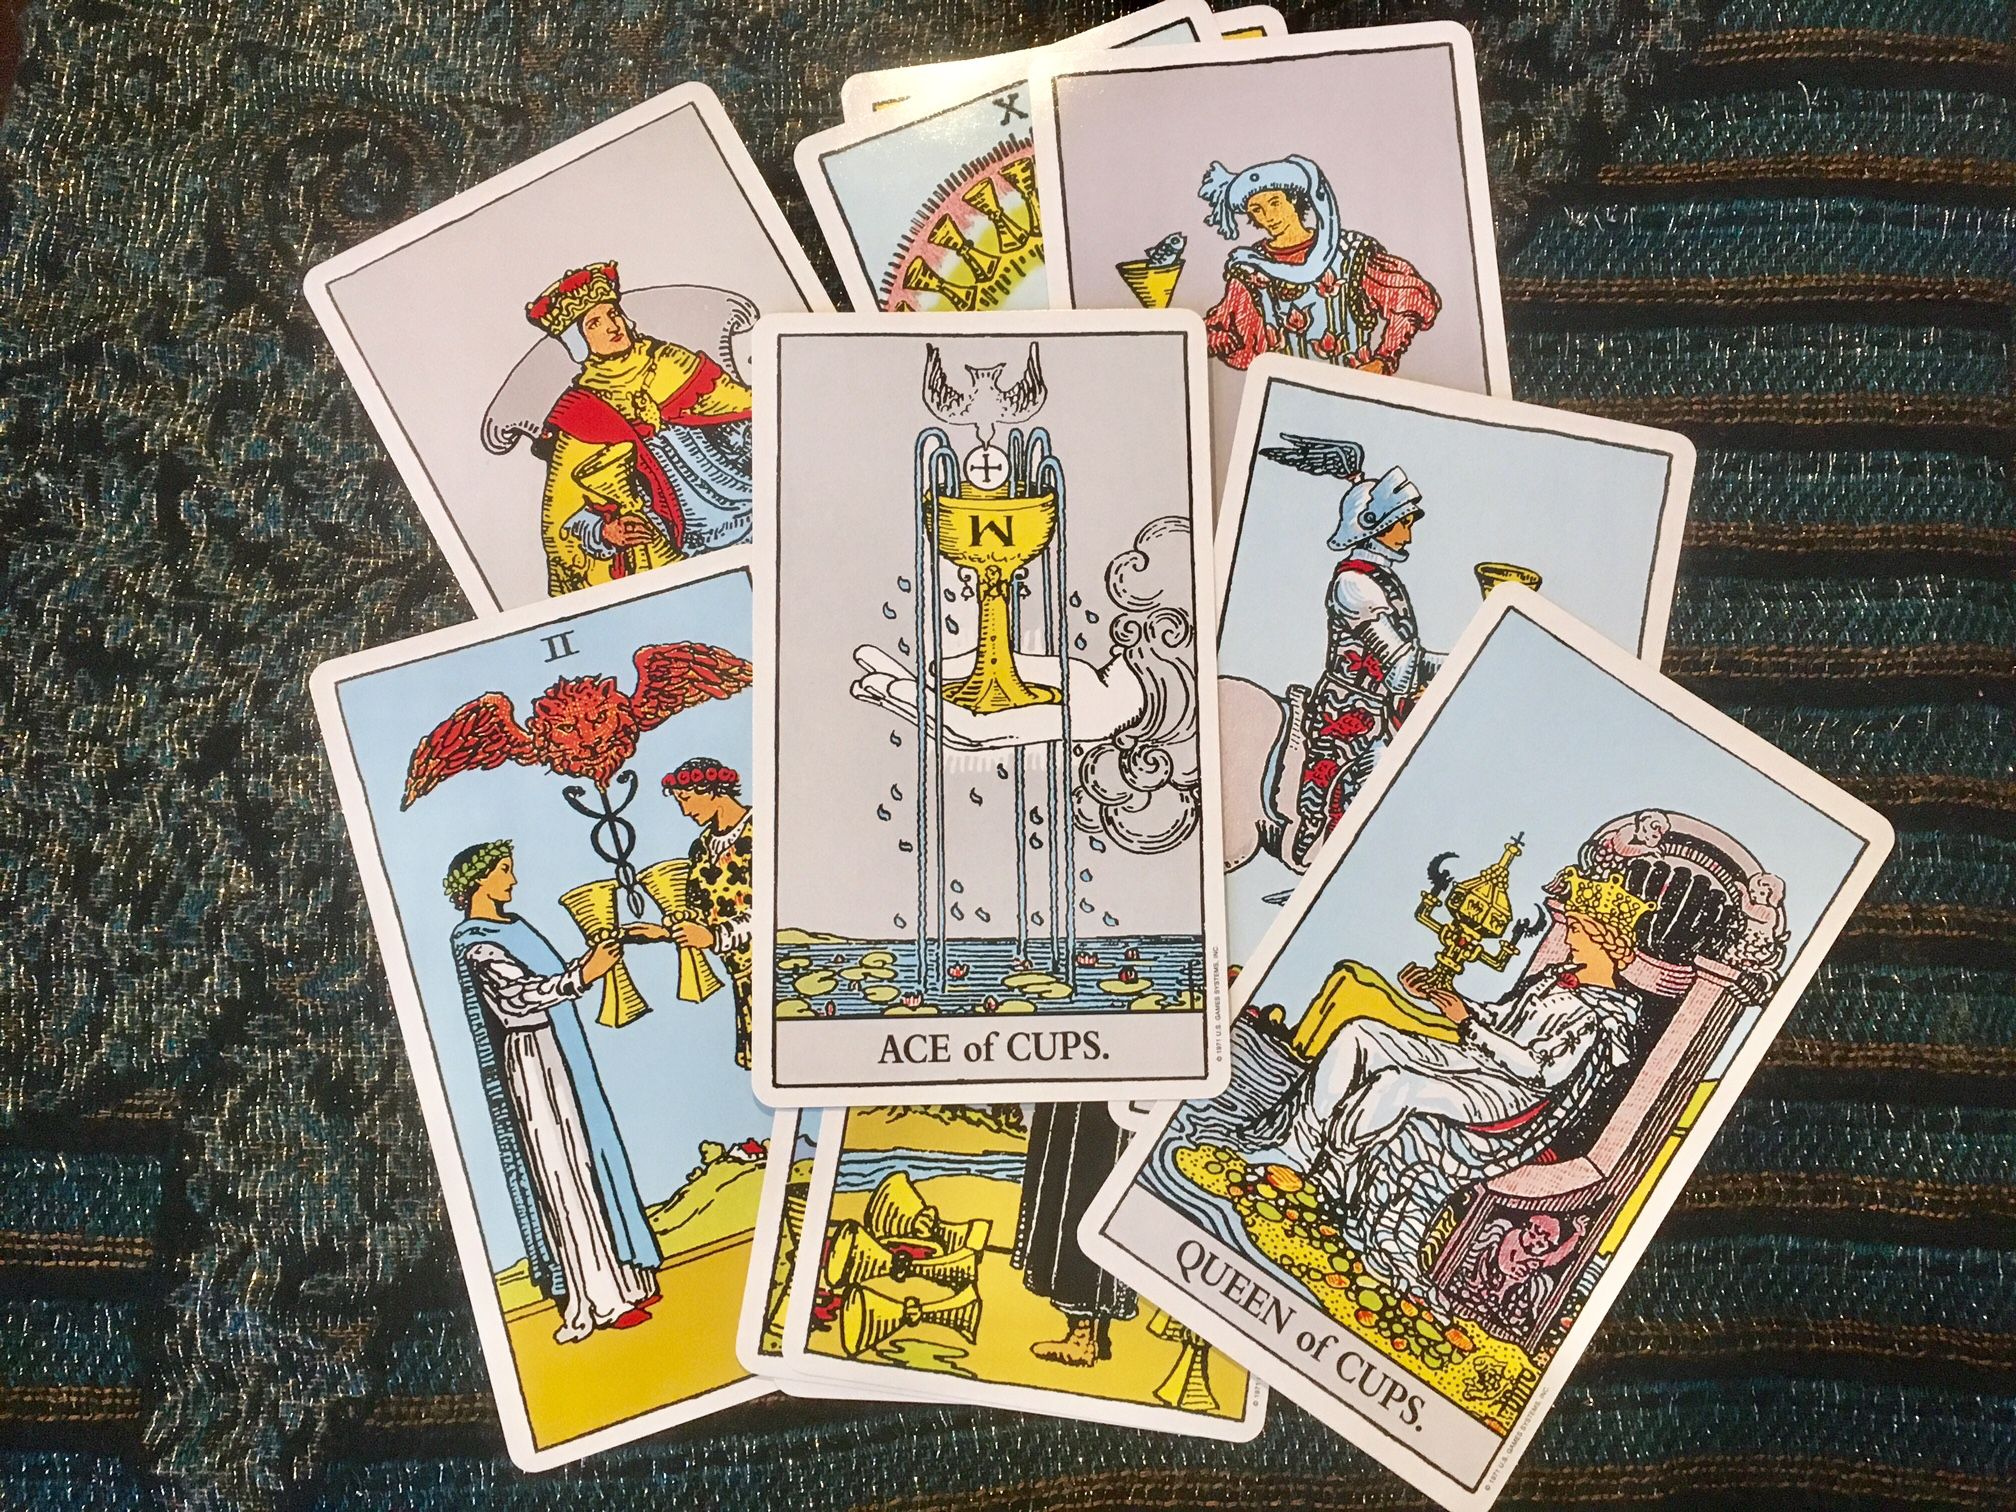 6 of cups tarot meaning